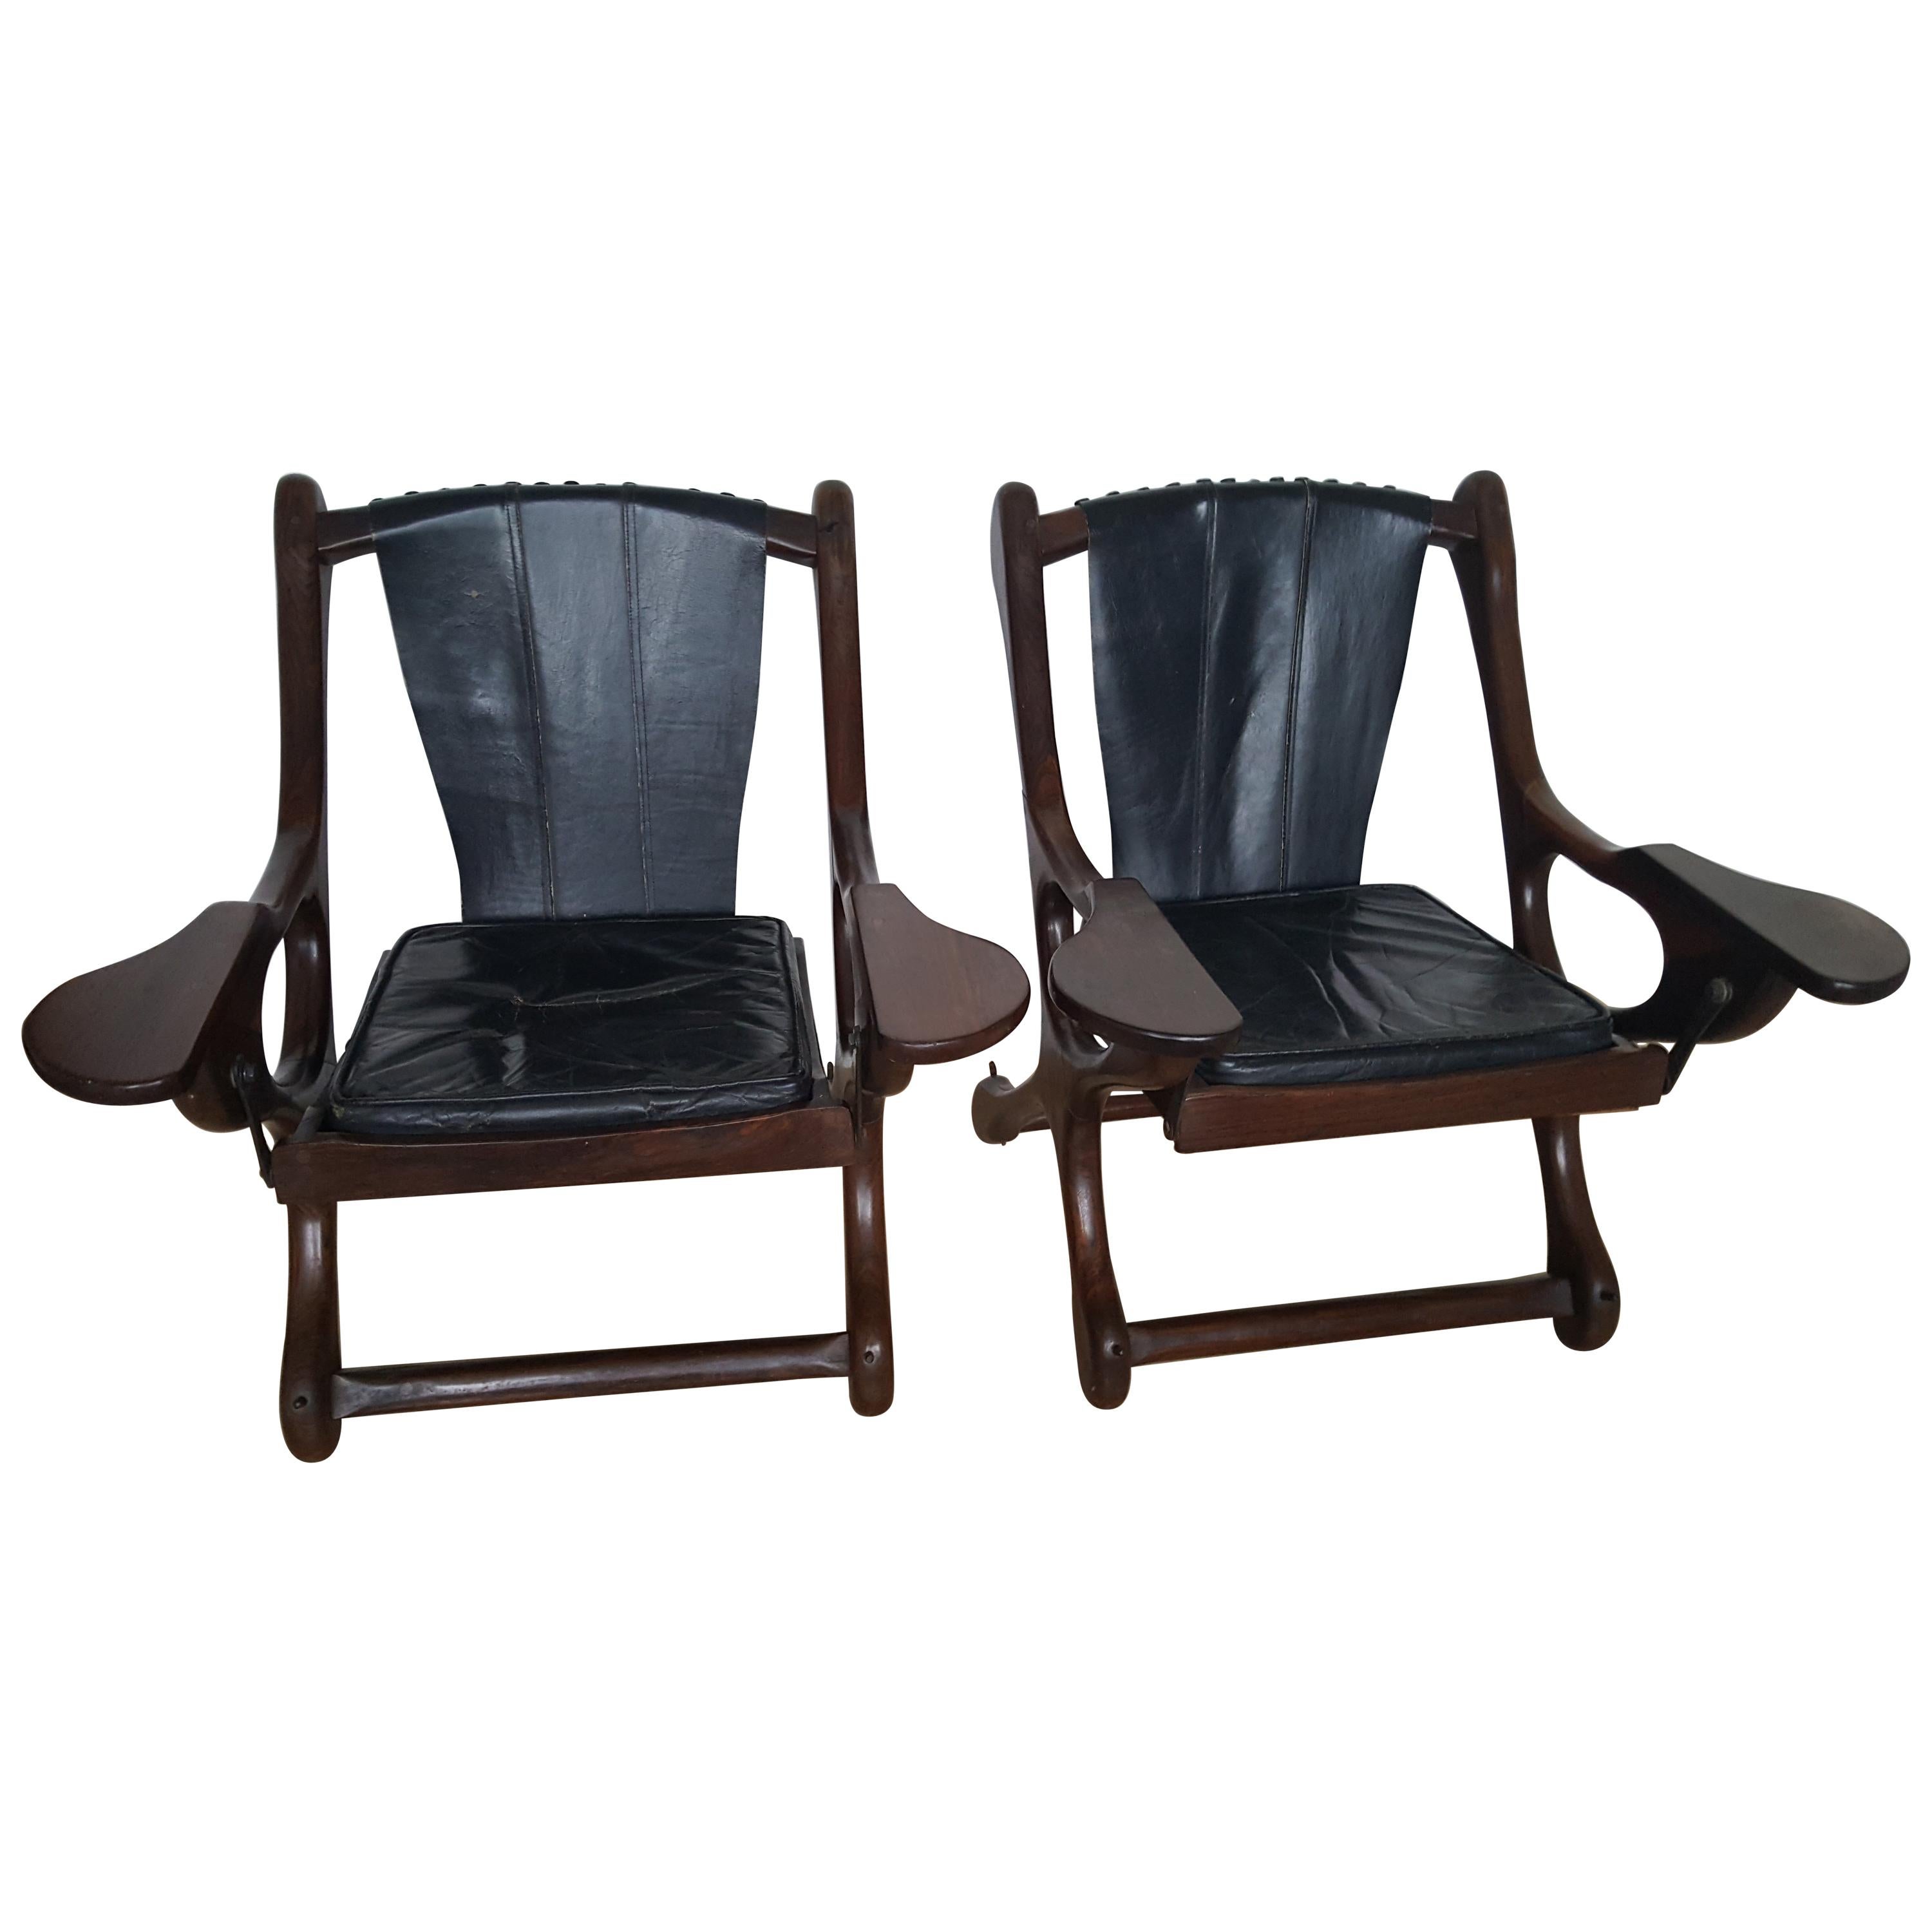 Awesome Pair of Don Shoemaker Rosewood Swinger Chairs For Sale